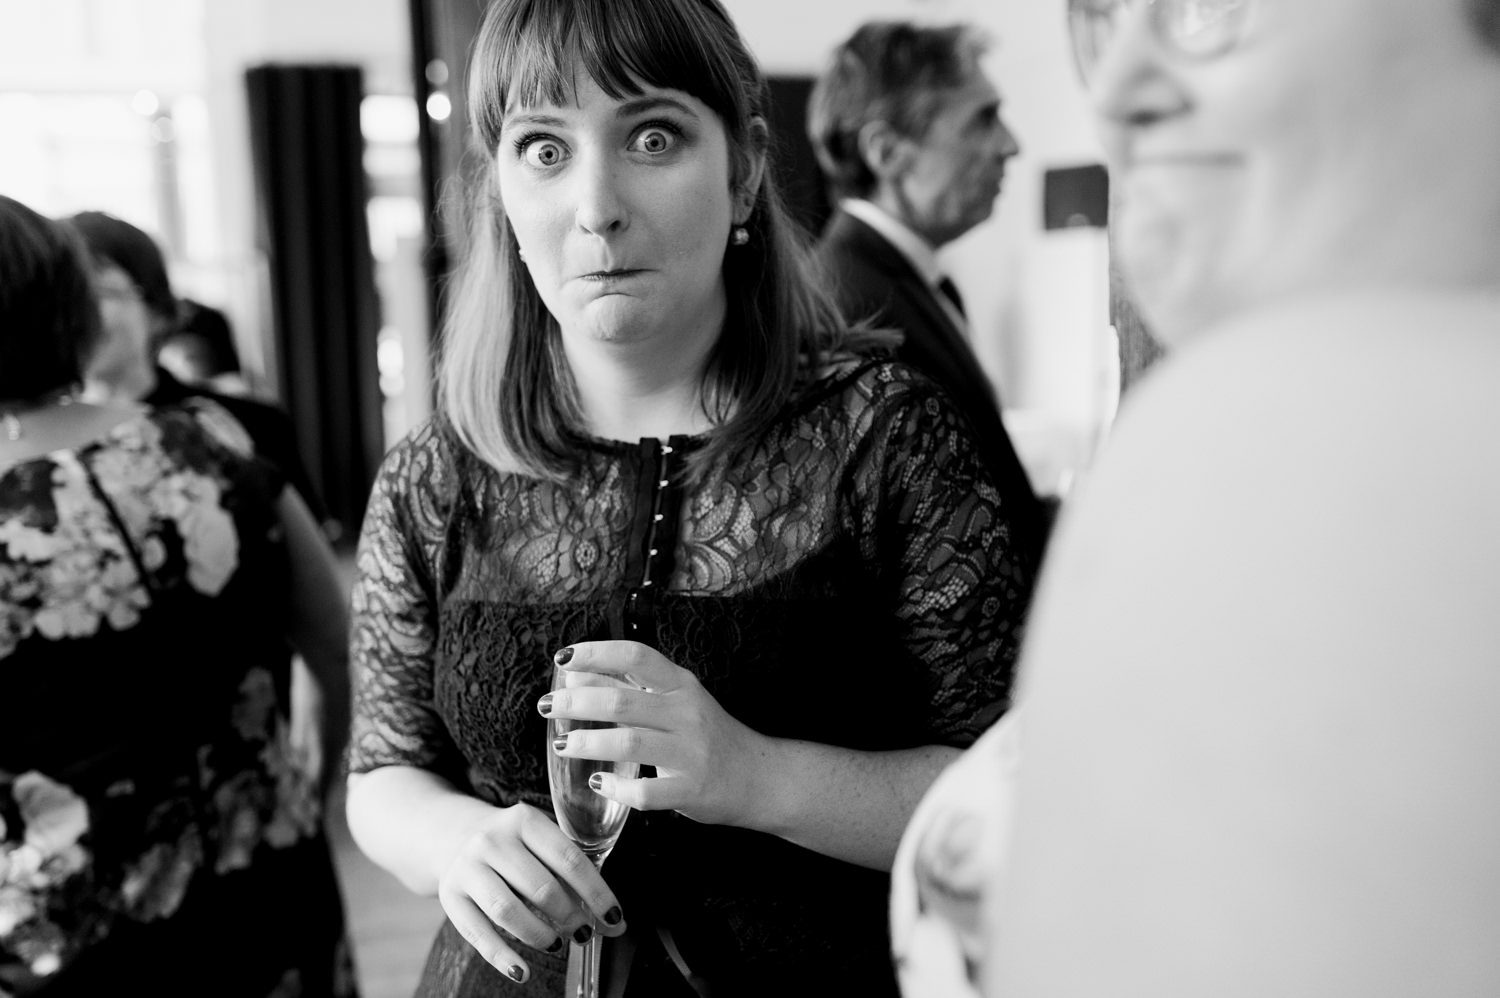 A wedding guest makes a funny face at the camera. by The Cleaners wedding photographer Briana Morrison